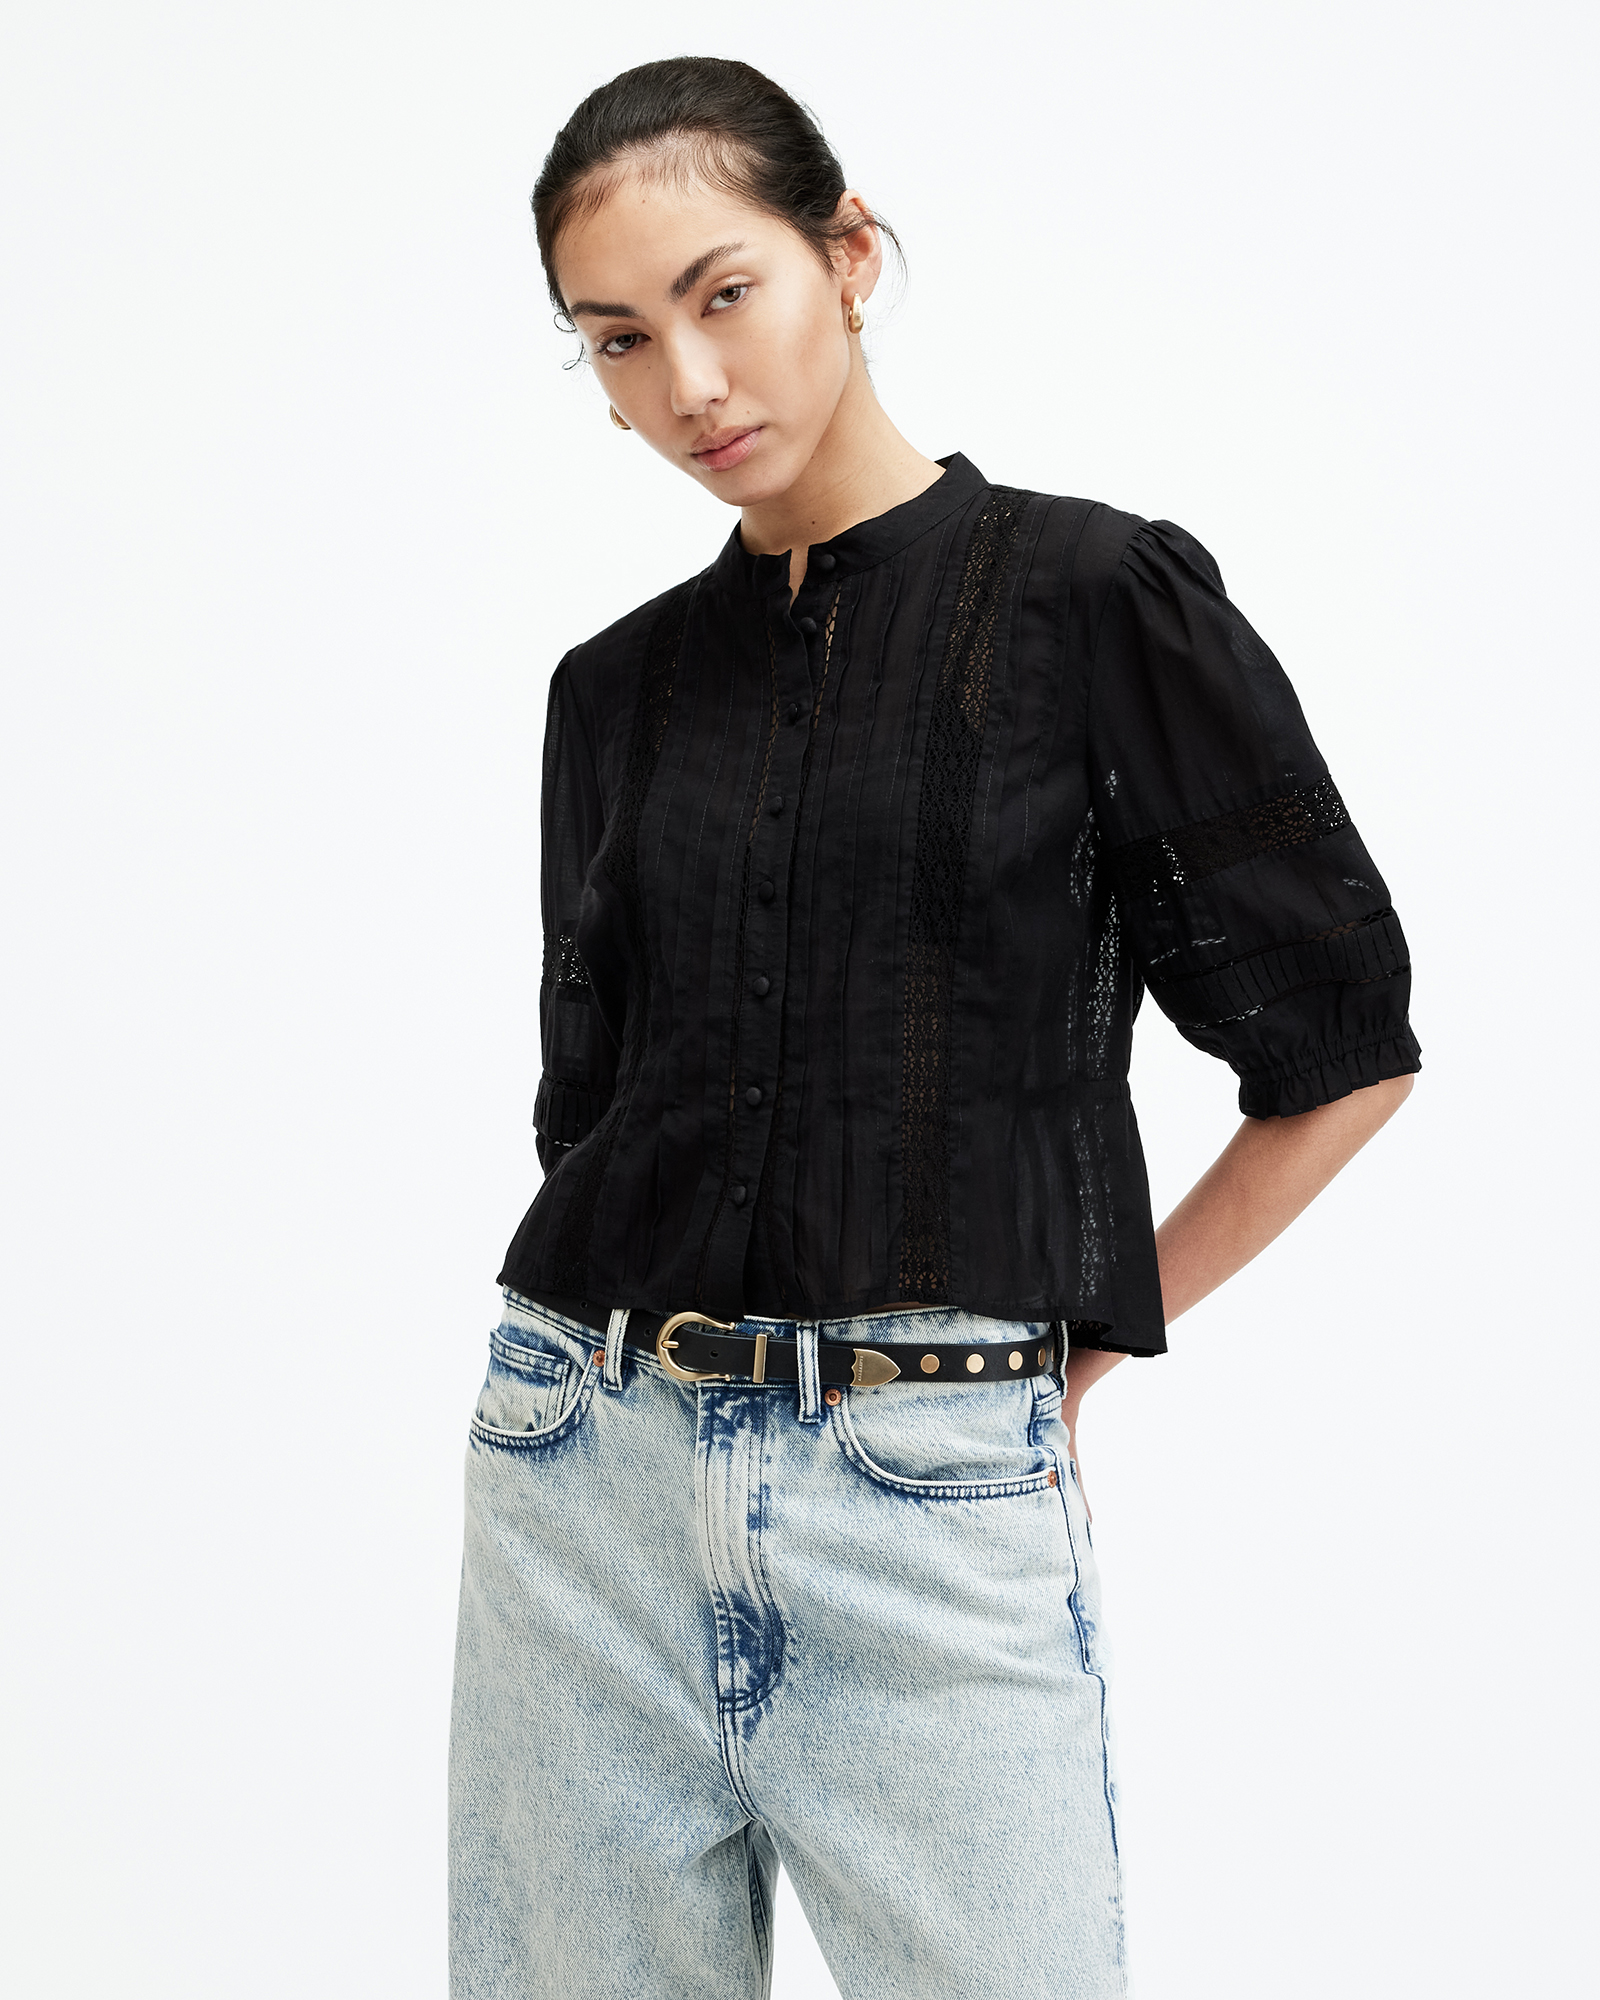 AllSaints Libby Slim Puff Sleeve Embroidered Shirt,, Black, Size: UK 6/US 2